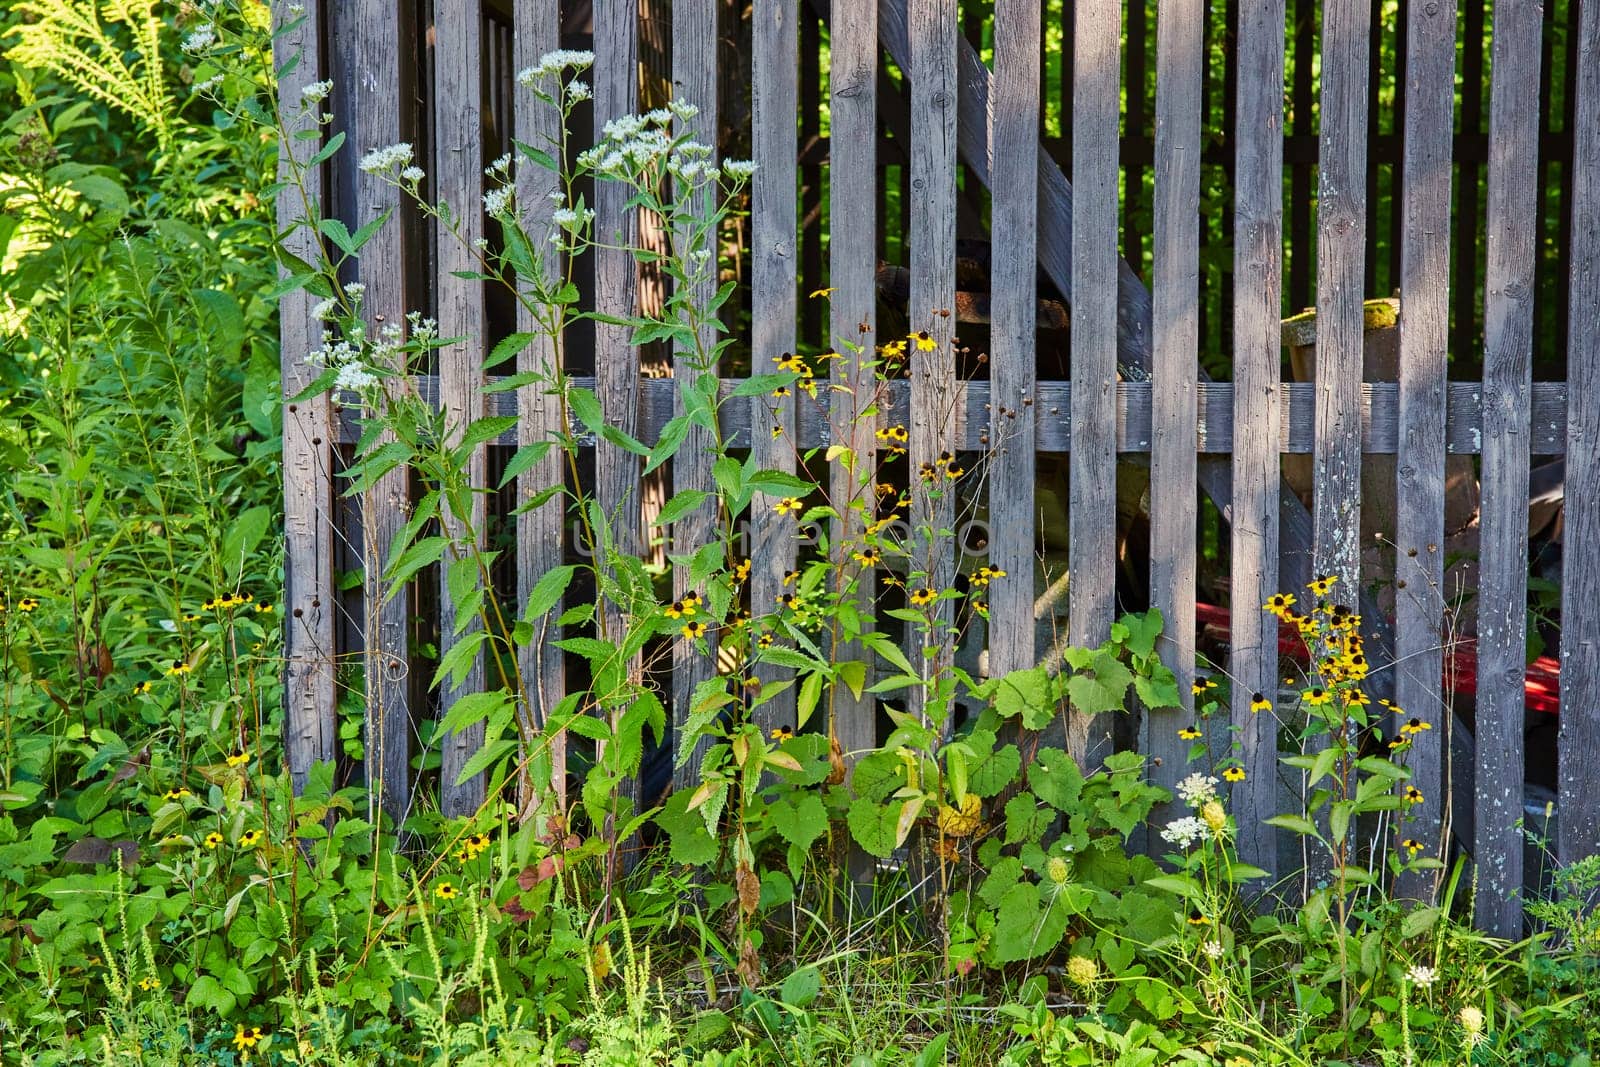 Rustic wooden fence being reclaimed by overgrown greenery and wildflowers in Muncie, Indiana, casting a serene and peaceful mood